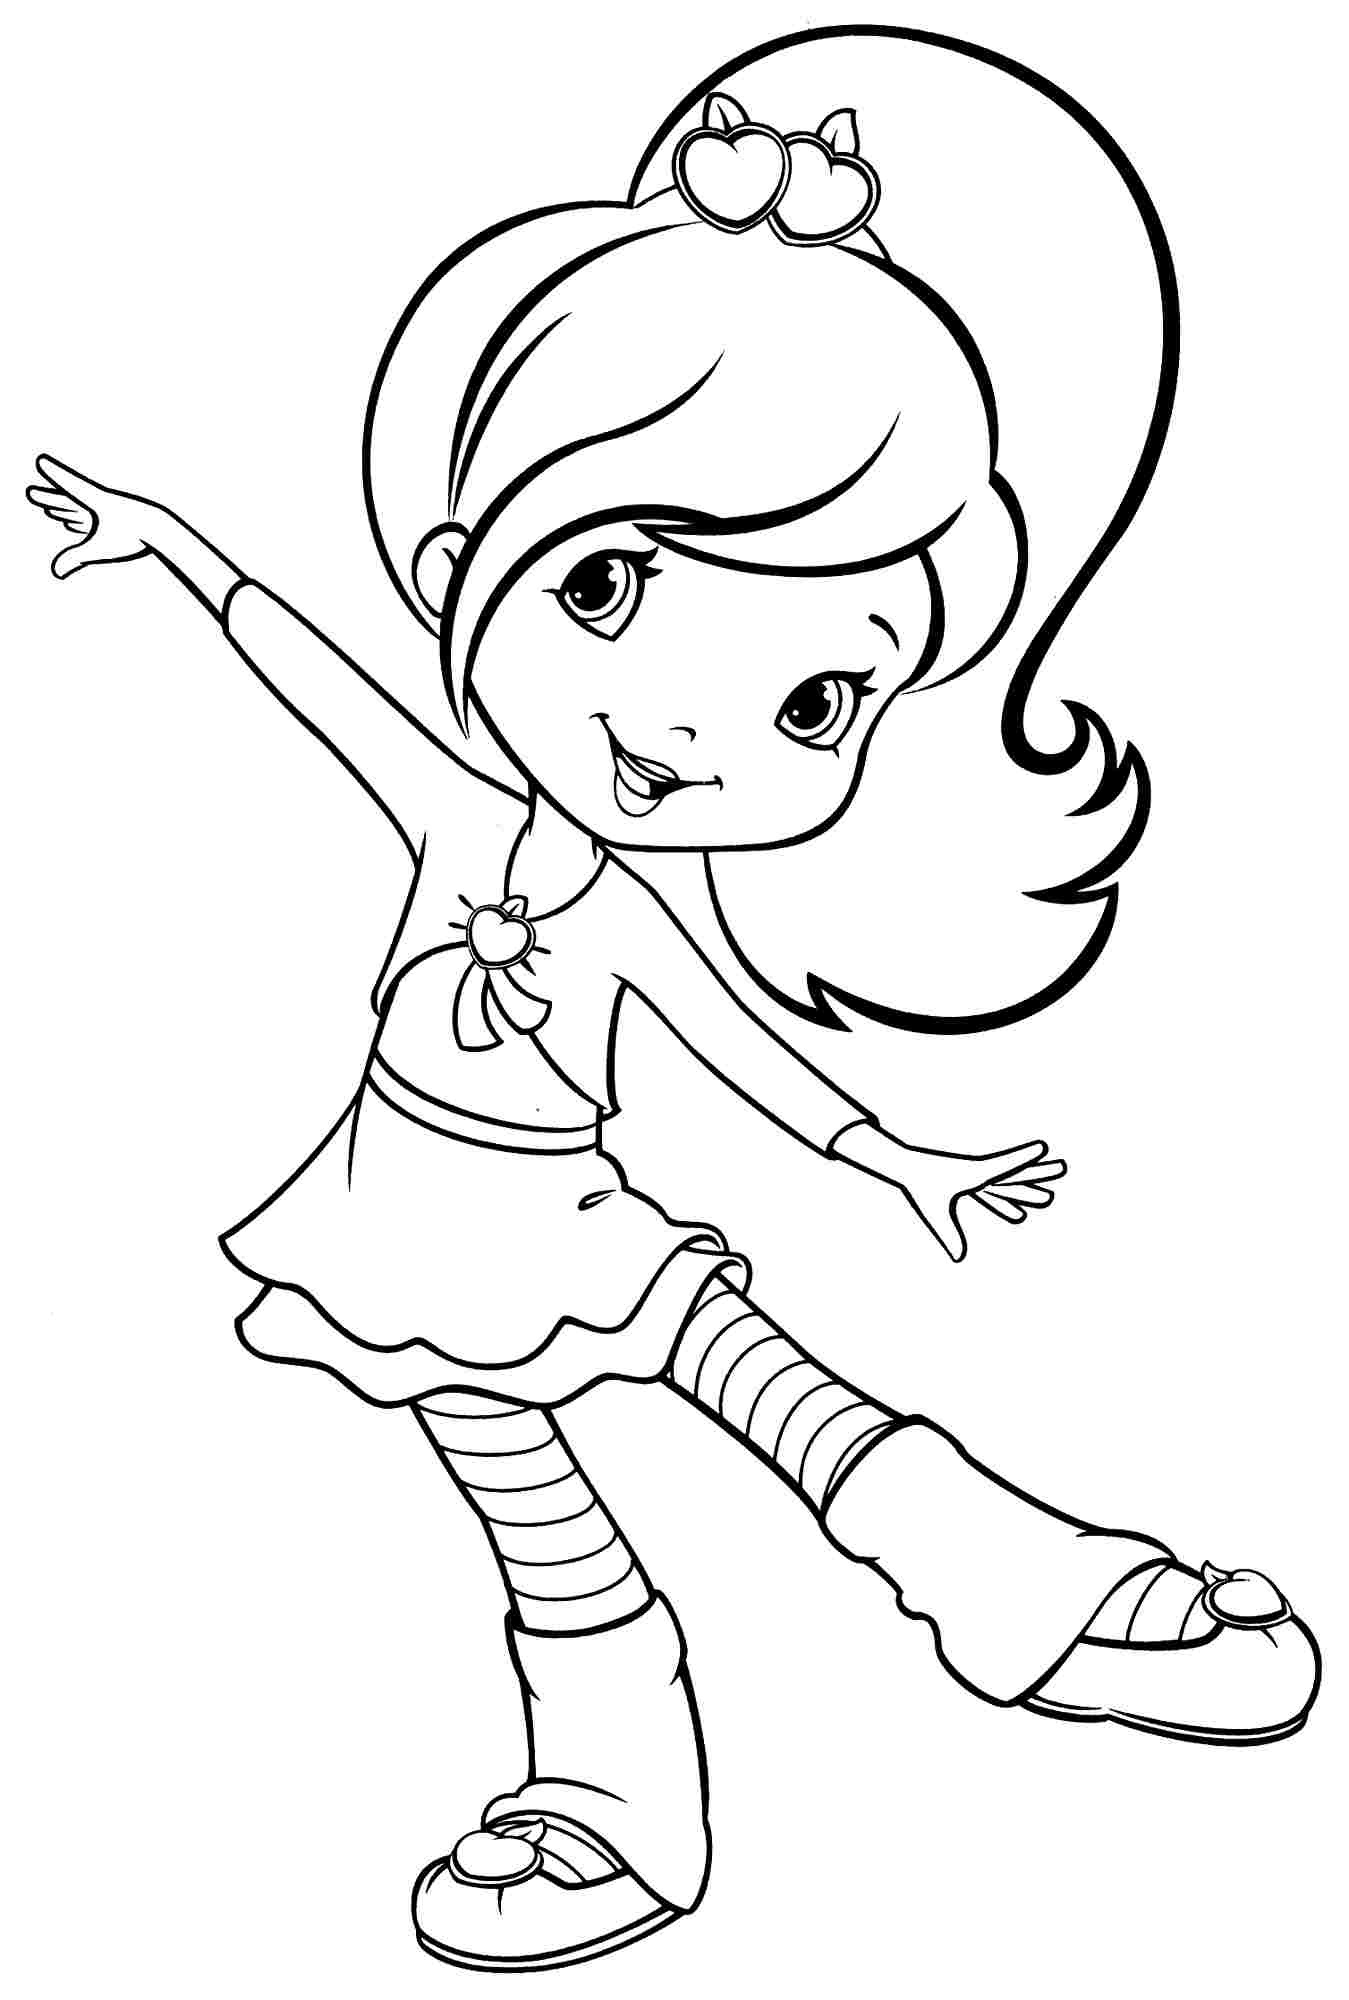 Cartoon Characters Coloring Pages Printable at GetColorings.com | Free ...